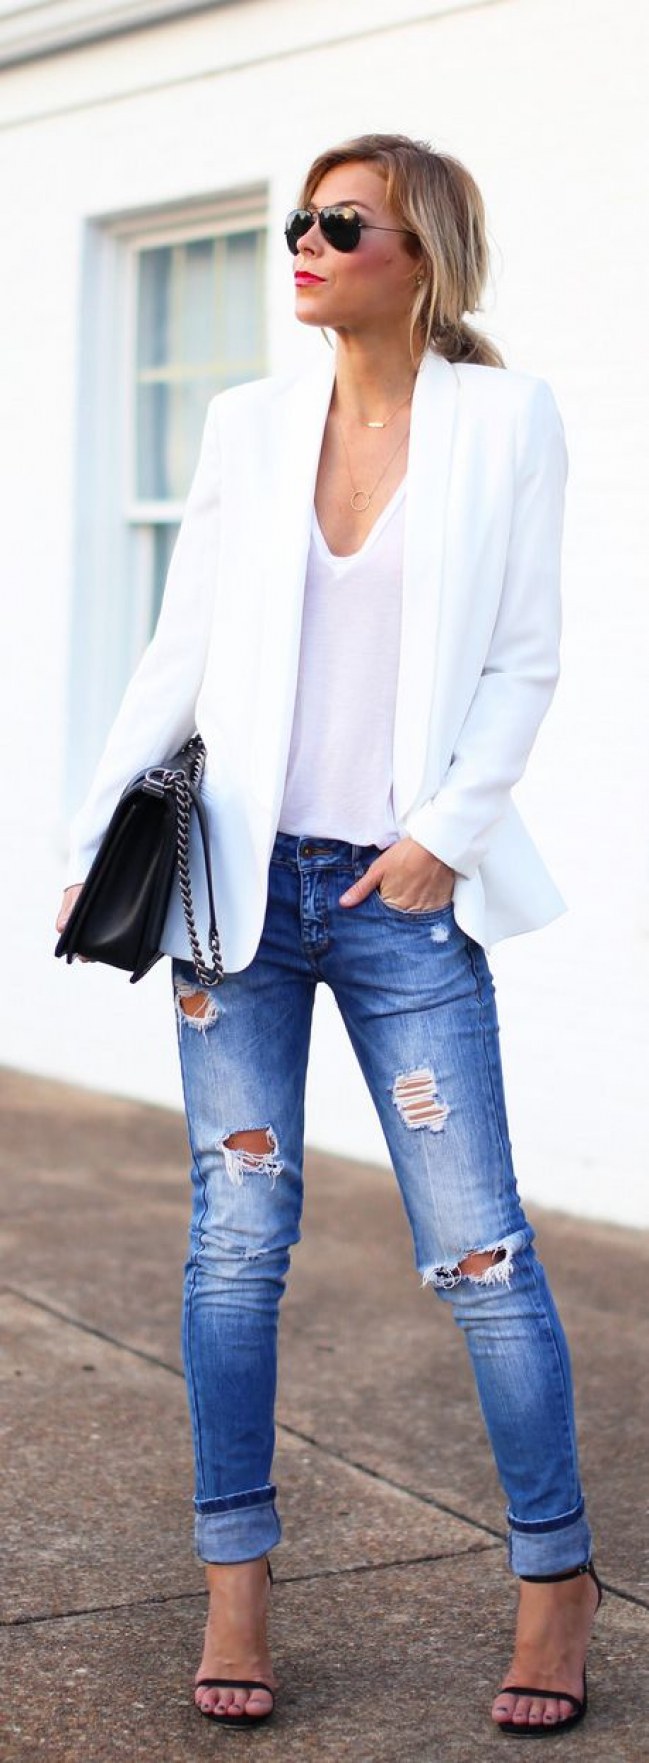 The Coolest White Outfit Combinations That You Must Try This Season